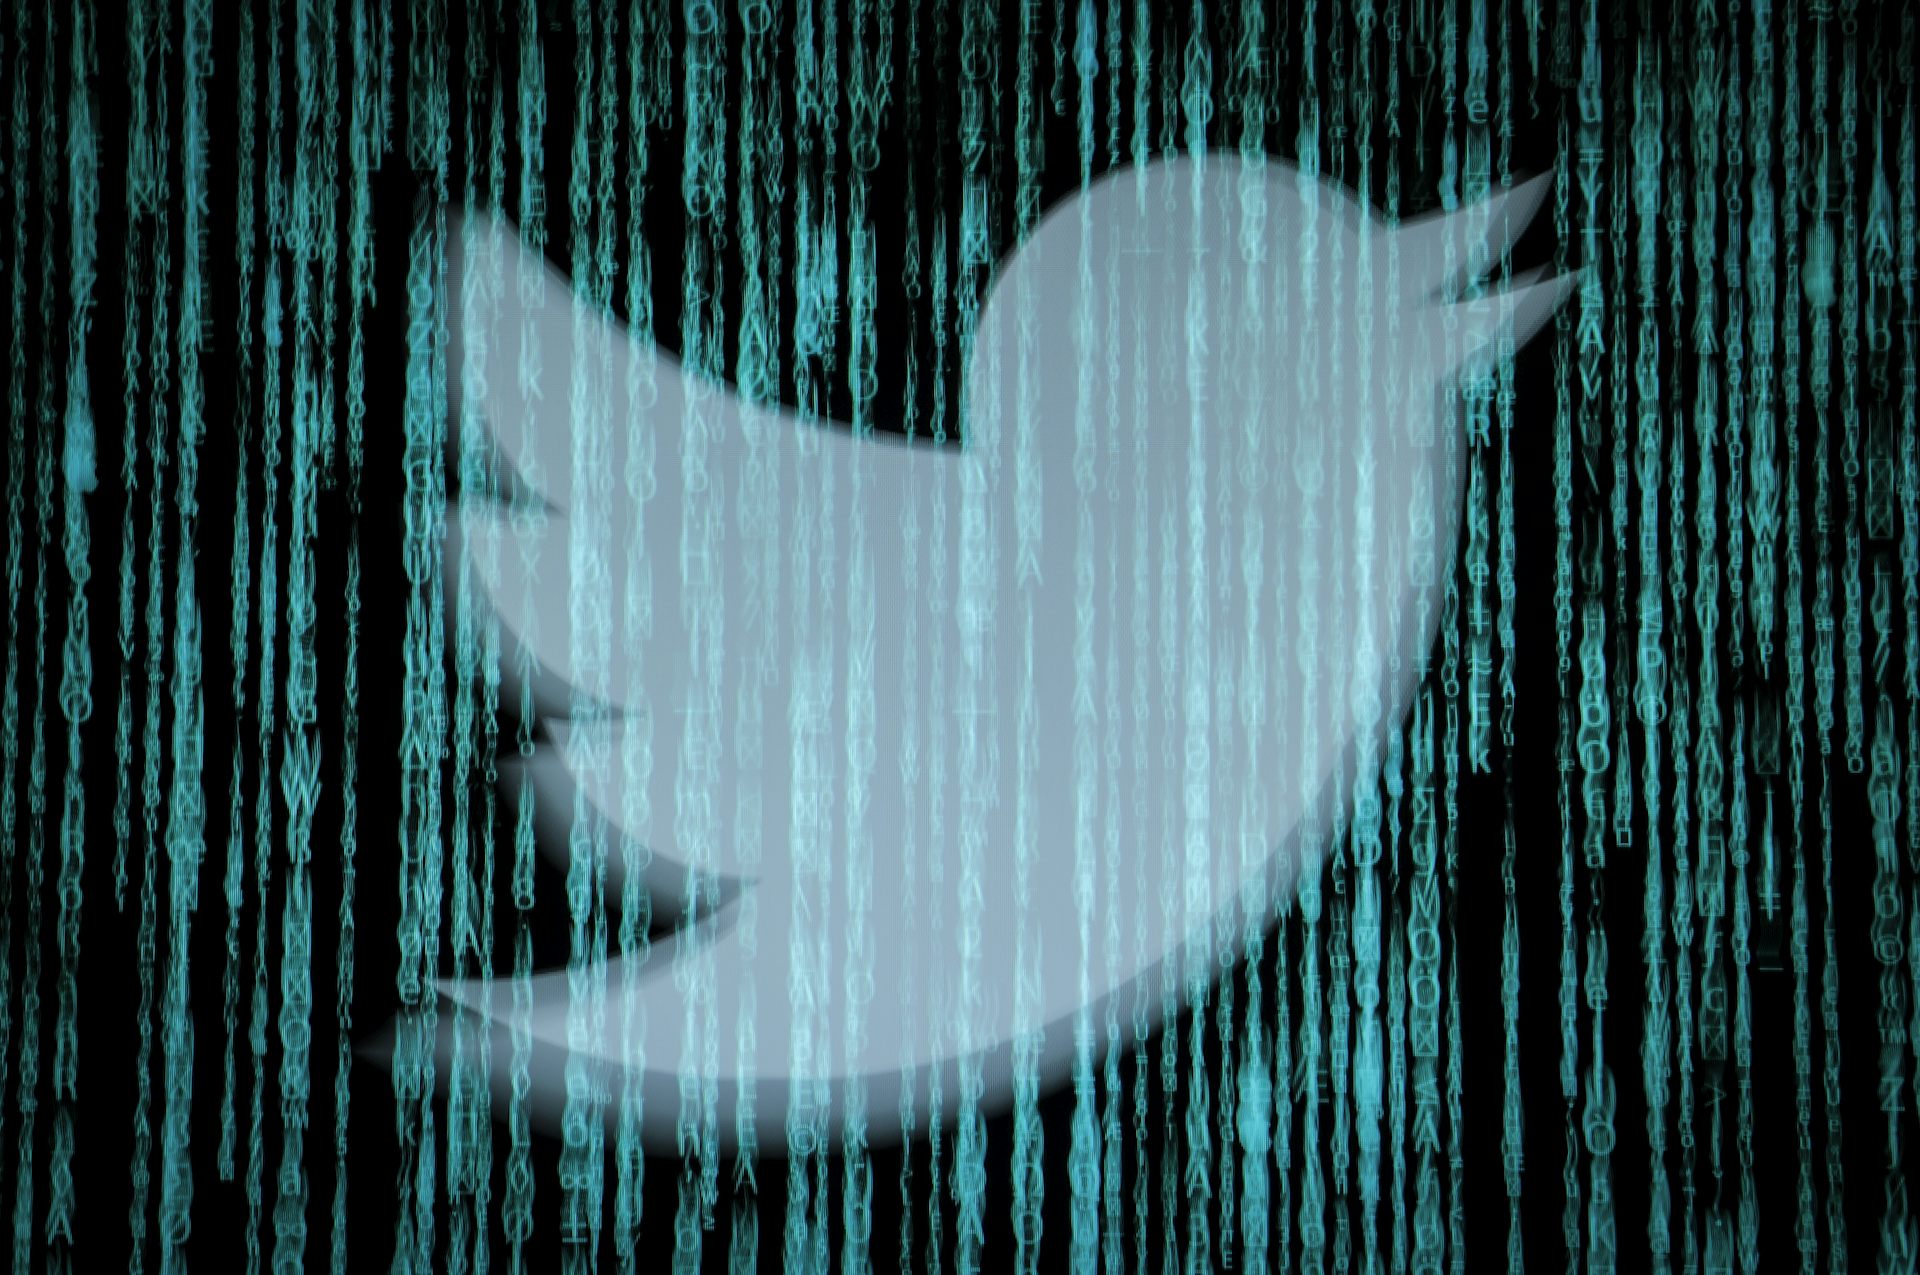 Twitter Hack Exposes Broader Threat to Democracy and Society